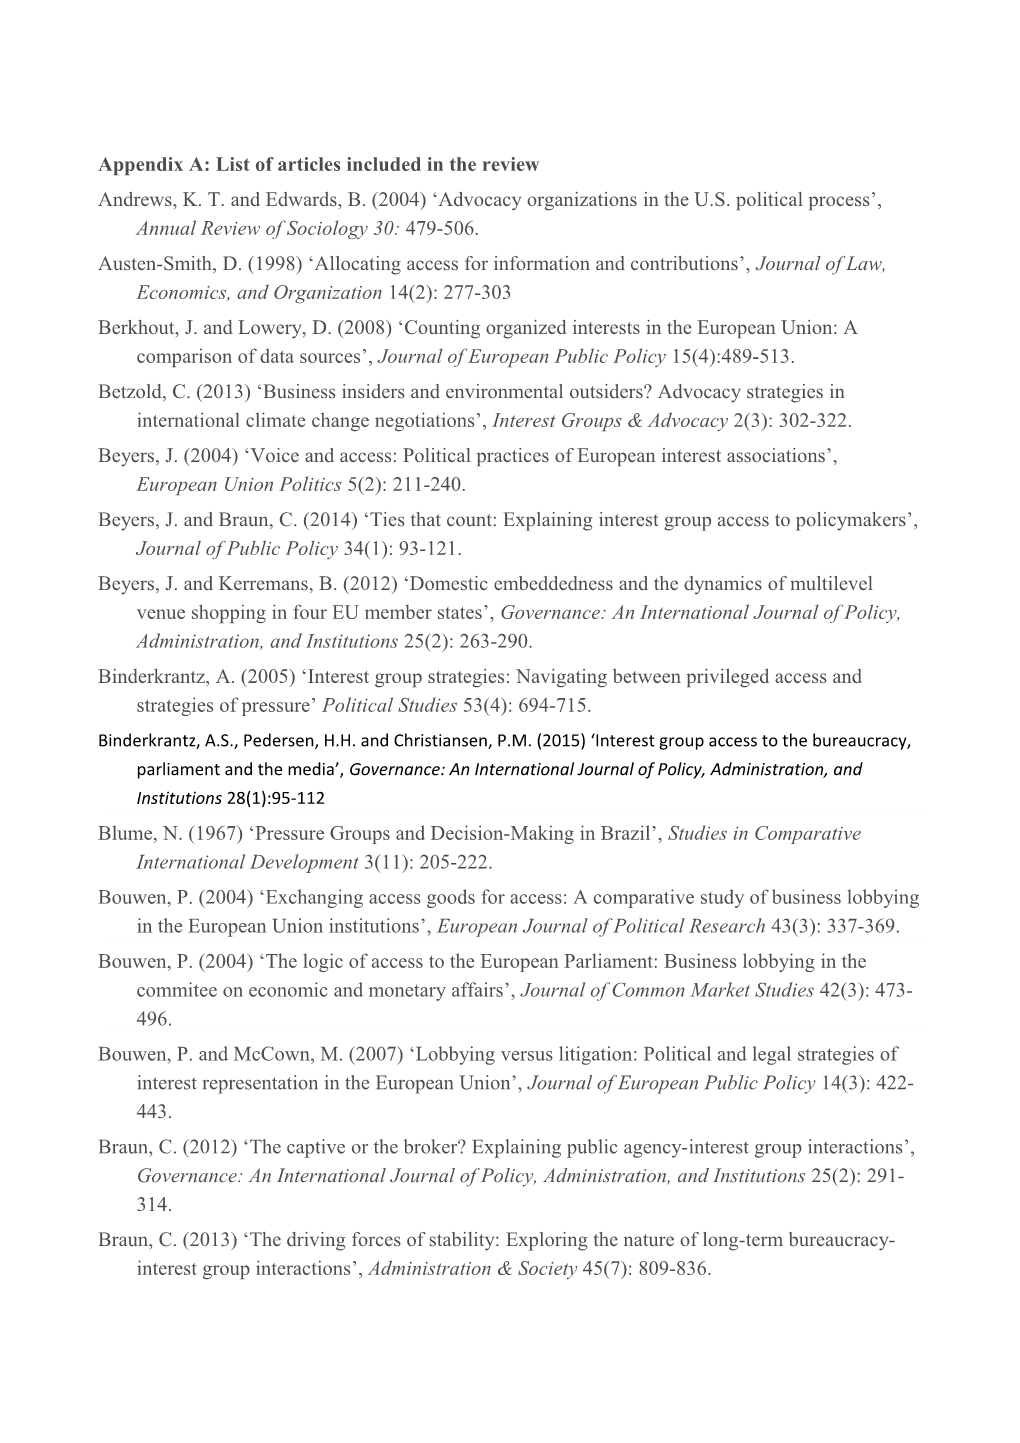 Appendix A: List of Articles Included in the Review